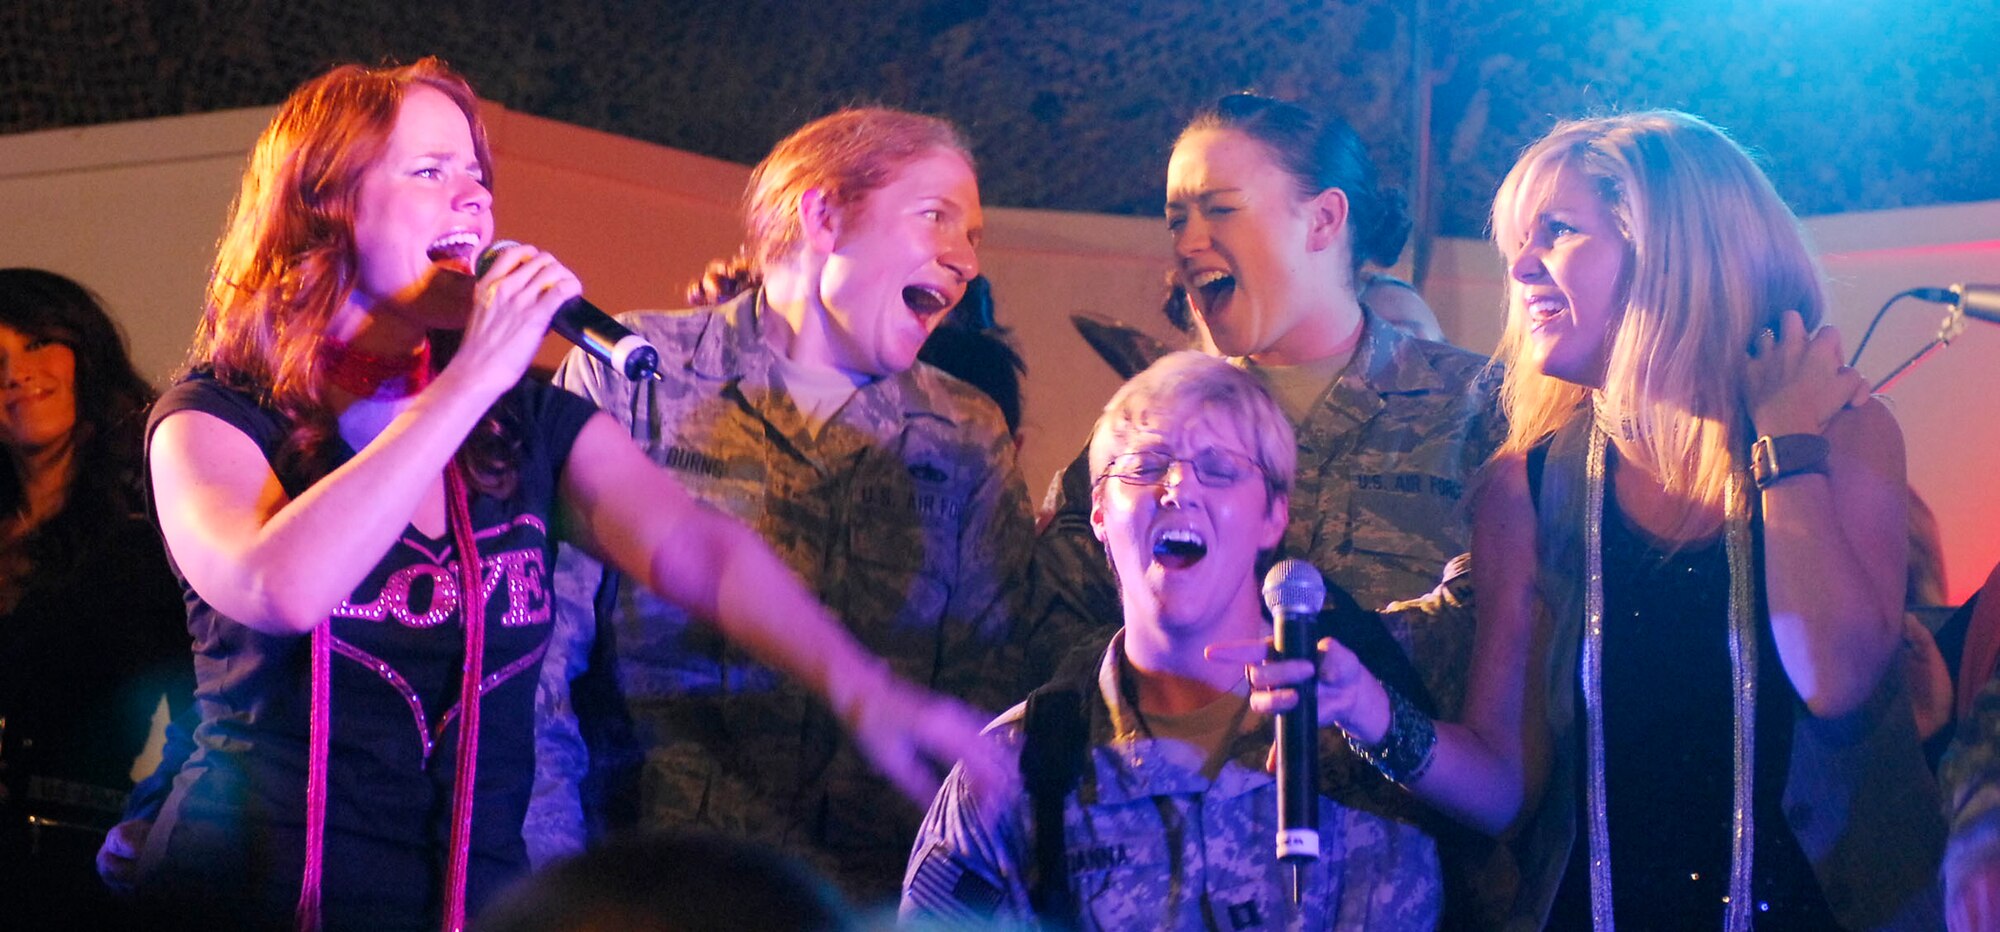 Tech. Sgt. Amanda Burns (left) and Senior Airman Kayla Bilger (right) sing onstage with members of the Lieutenant Dan Band Nov. 23, 2009, at Bagram Airfield, Afghanistan. Sergeant Burns, a Falmouth, Ken., native deployed from the U.S. Air Force Academy, won a pair of round trip tickets to anywhere in the states. Airman Bilger is from Hartland, Mich., and is deployed from Geilenkirchen Air Base Squadron, Germany. (U.S. Air Force photo/Senior Airman Susan Tracy)
